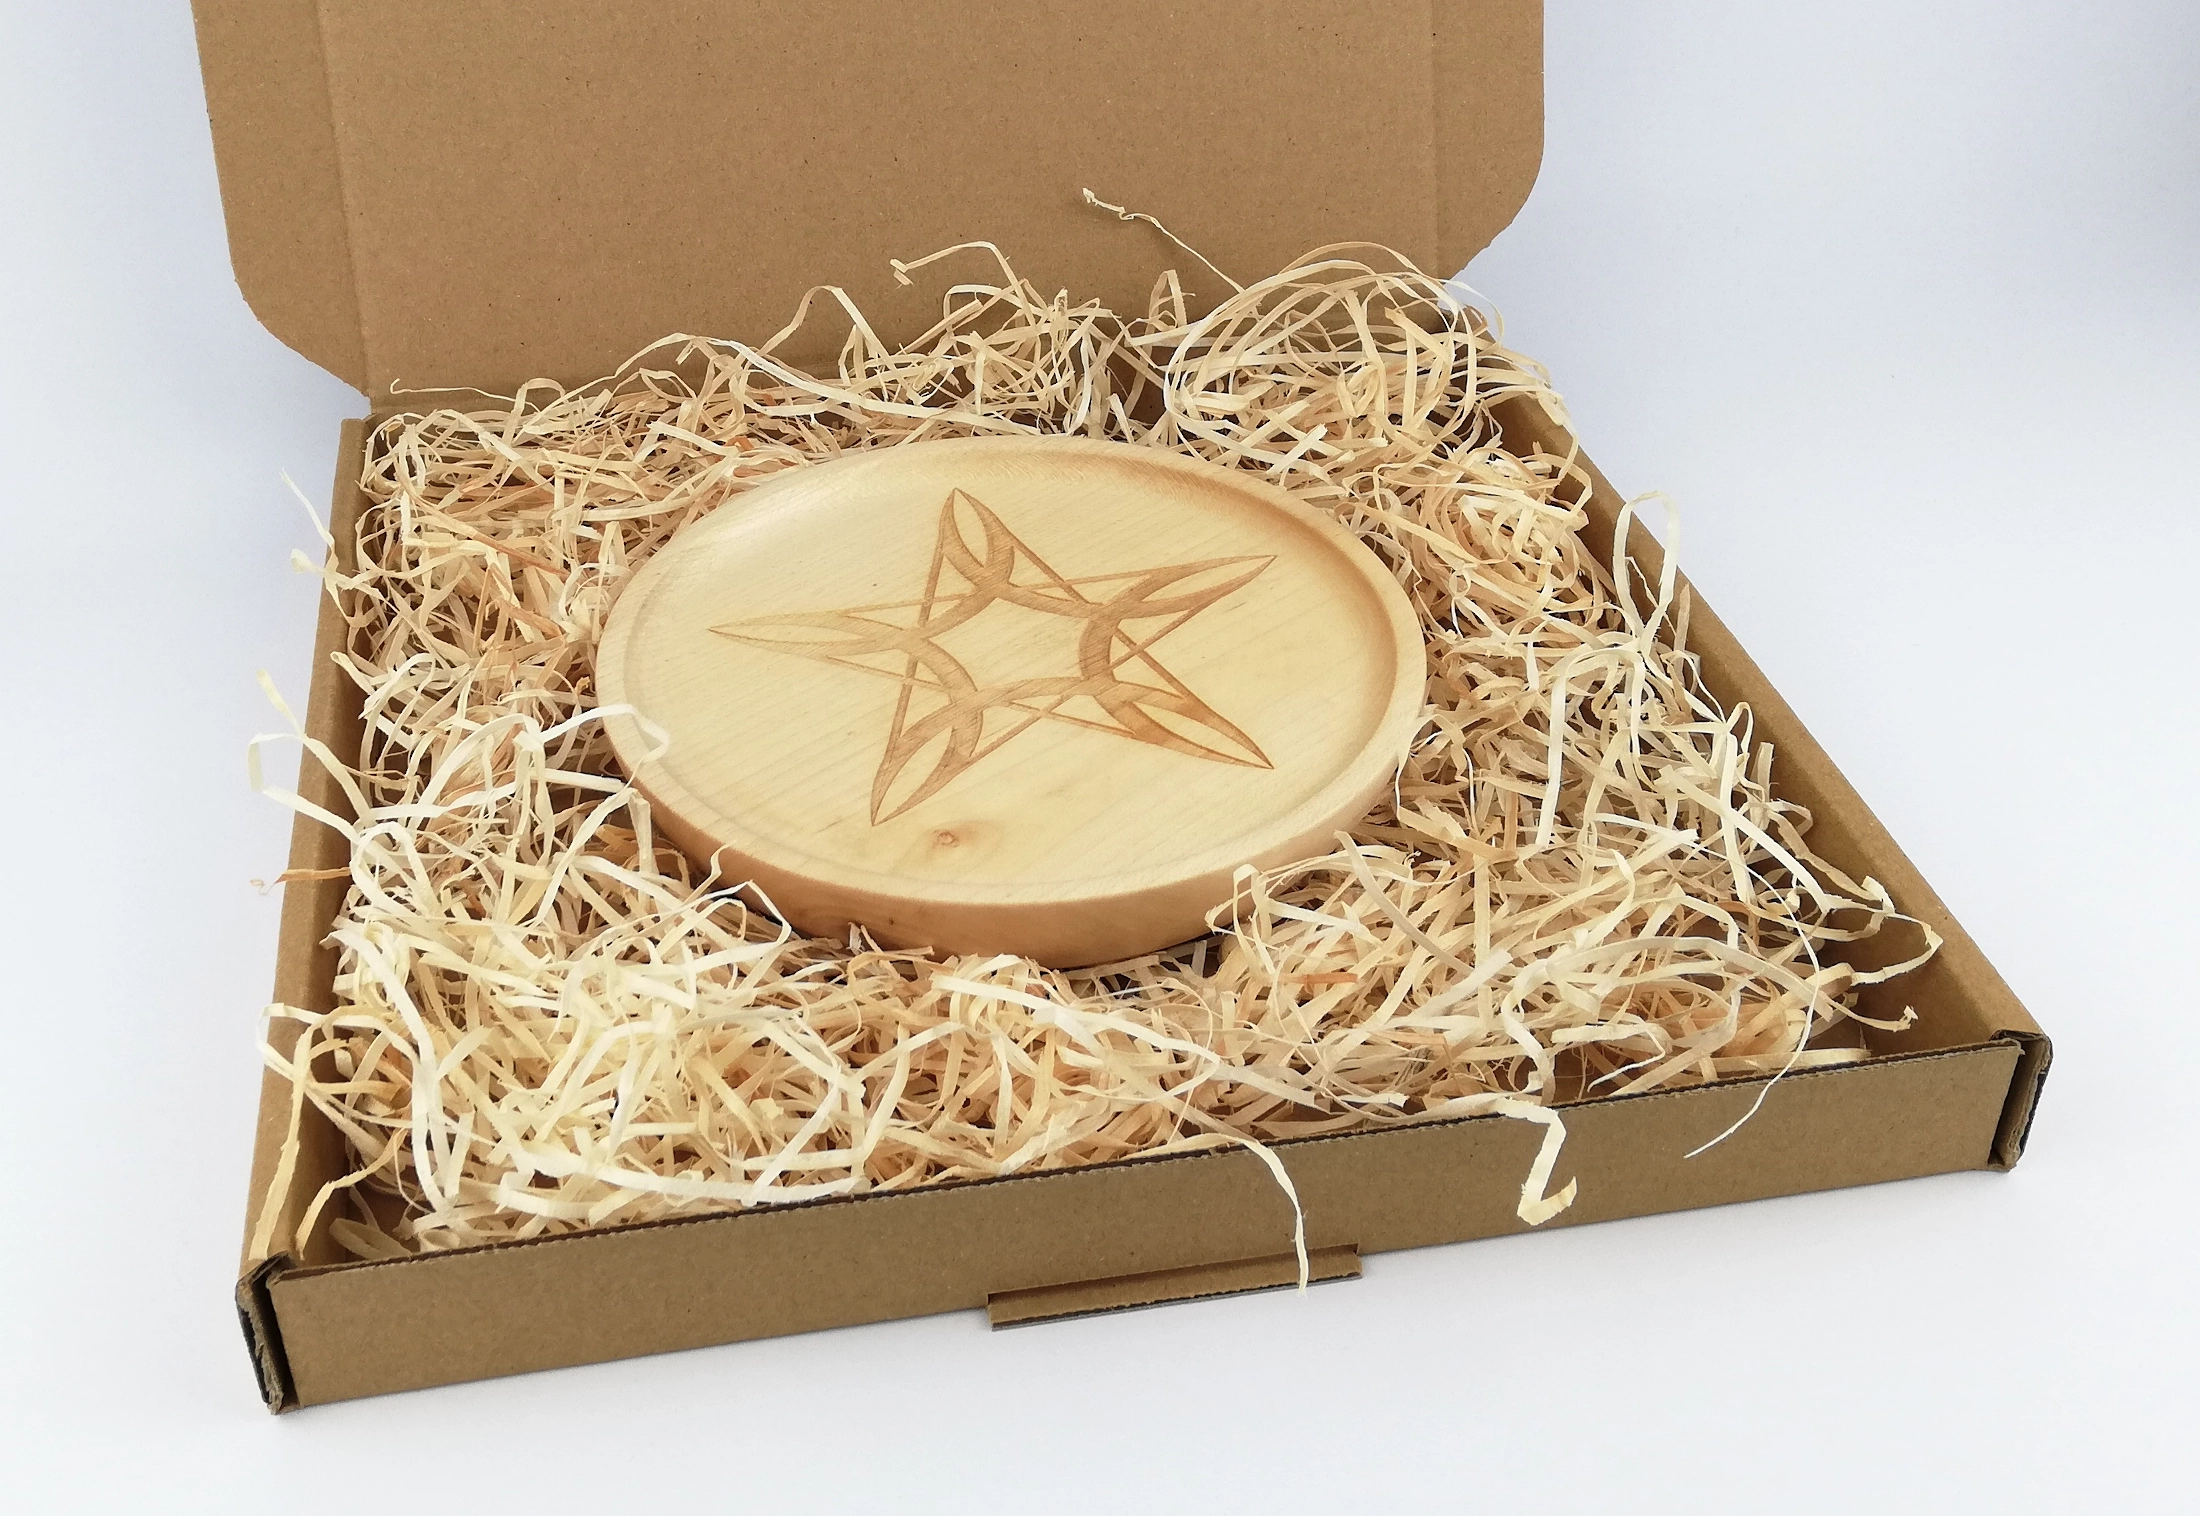 Pentagram on a small plate (16cm/6.3in in diameter), packed in a box.